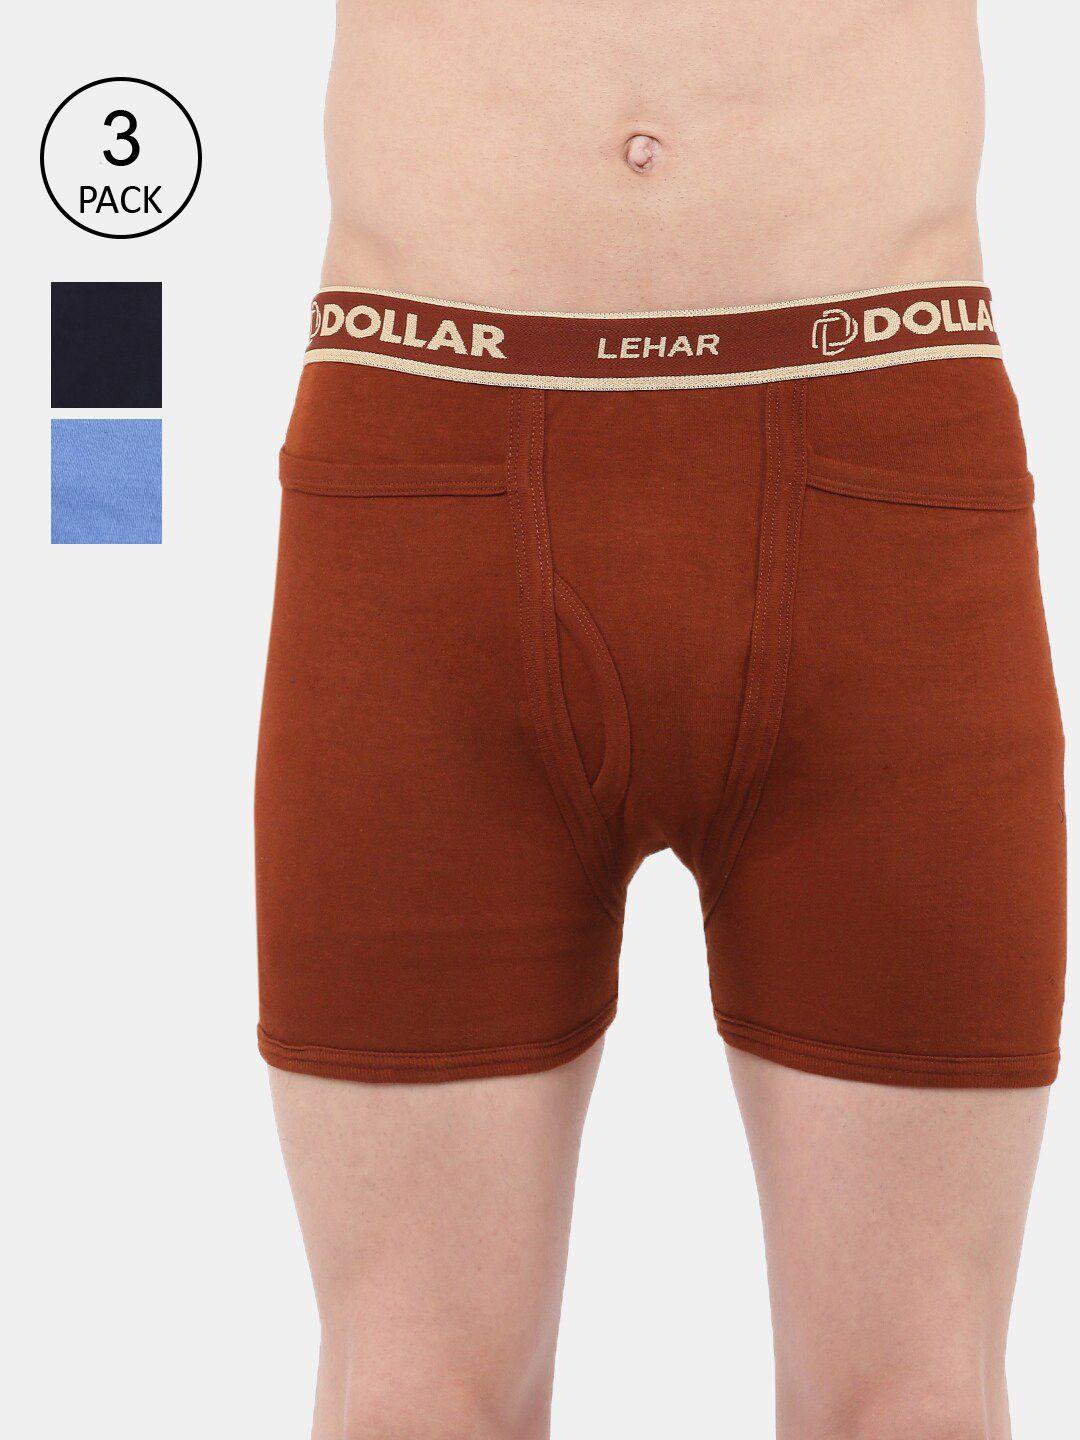 dollar-men-pack-of-3-assorted-pure-combed-cotton-trunks-mlhtr-03-po3-asst1